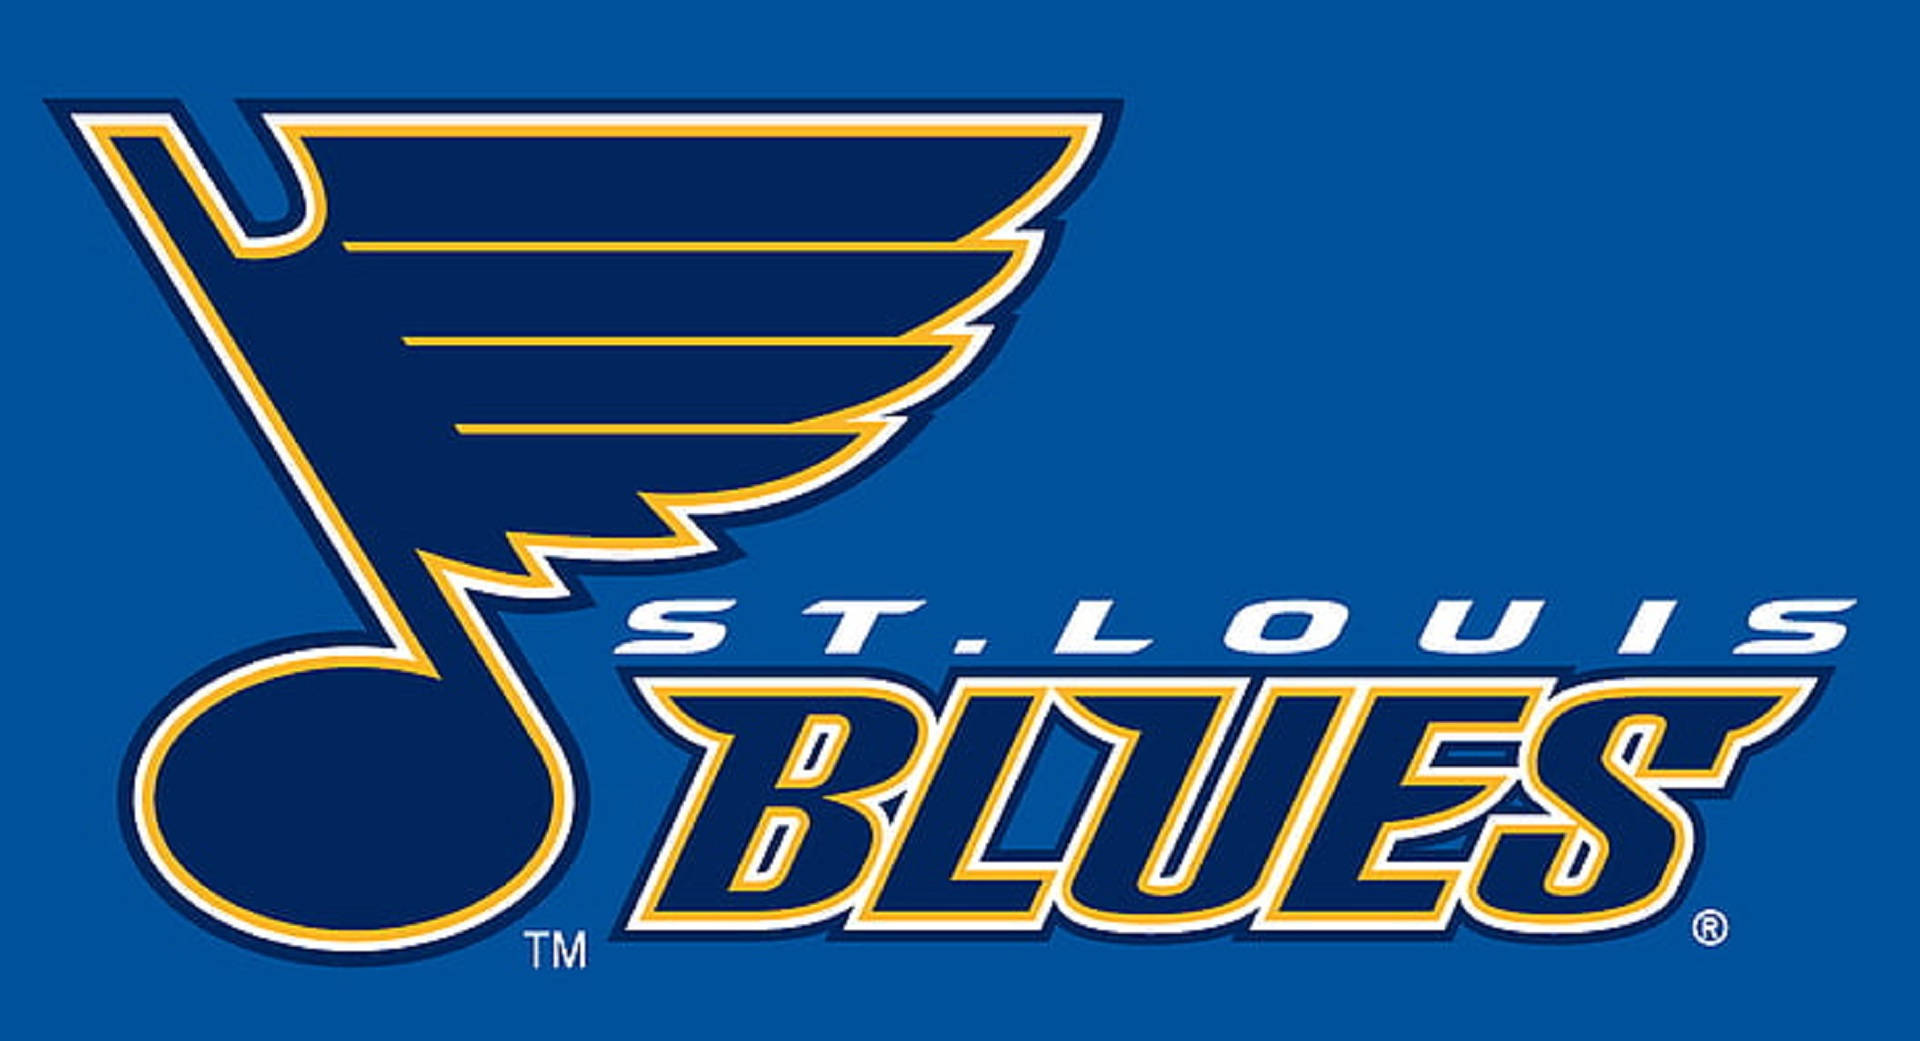 Top 999+ St Louis Blues Wallpaper Full HD, 4K Free to Use